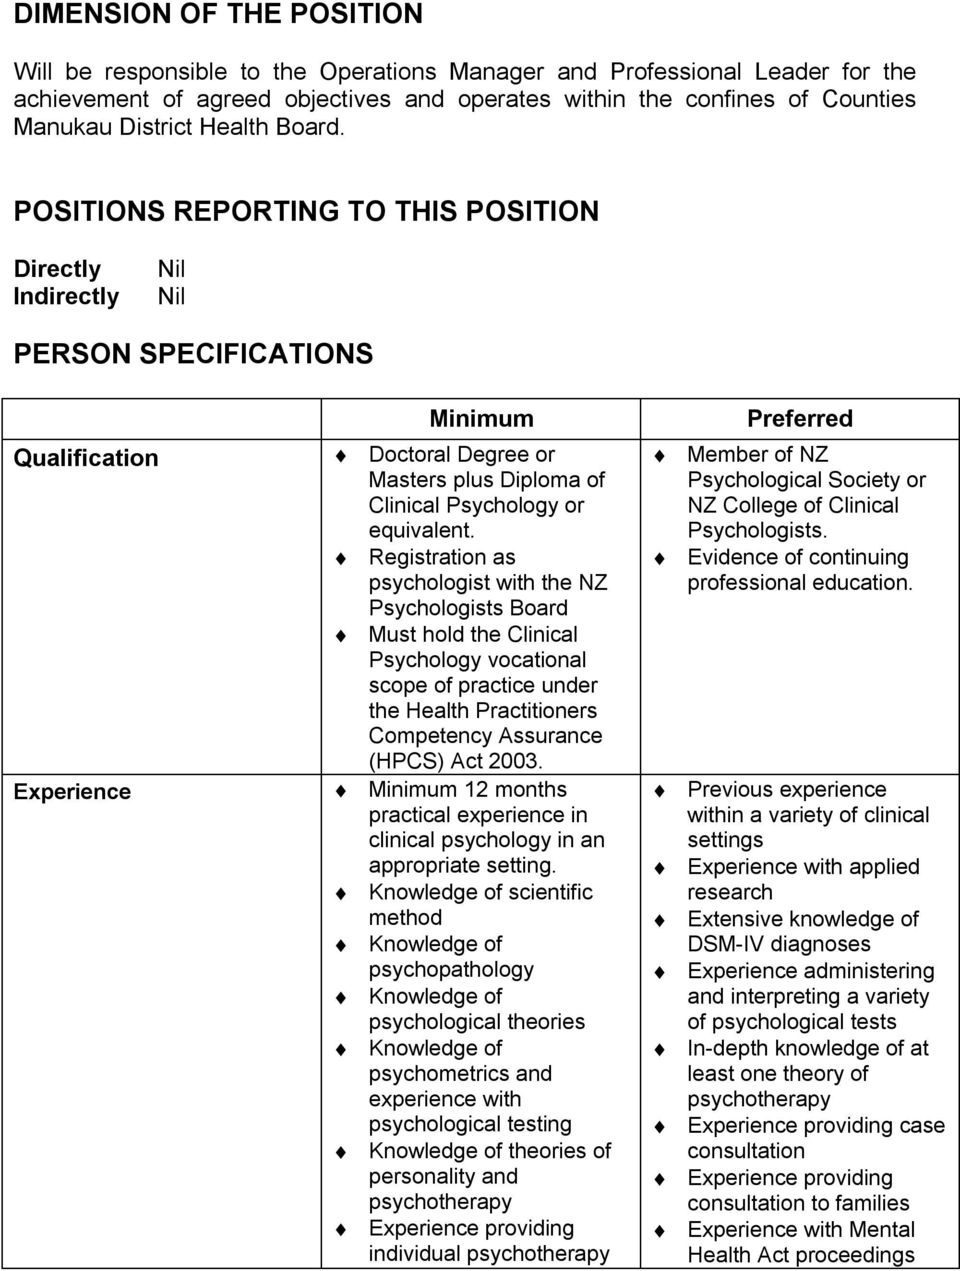 POSITIONS REPORTING TO THIS POSITION Directly Indirectly Nil Nil PERSON SPECIFICATIONS Qualification Experience Minimum Doctoral Degree or Masters plus Diploma of Clinical Psychology or equivalent.